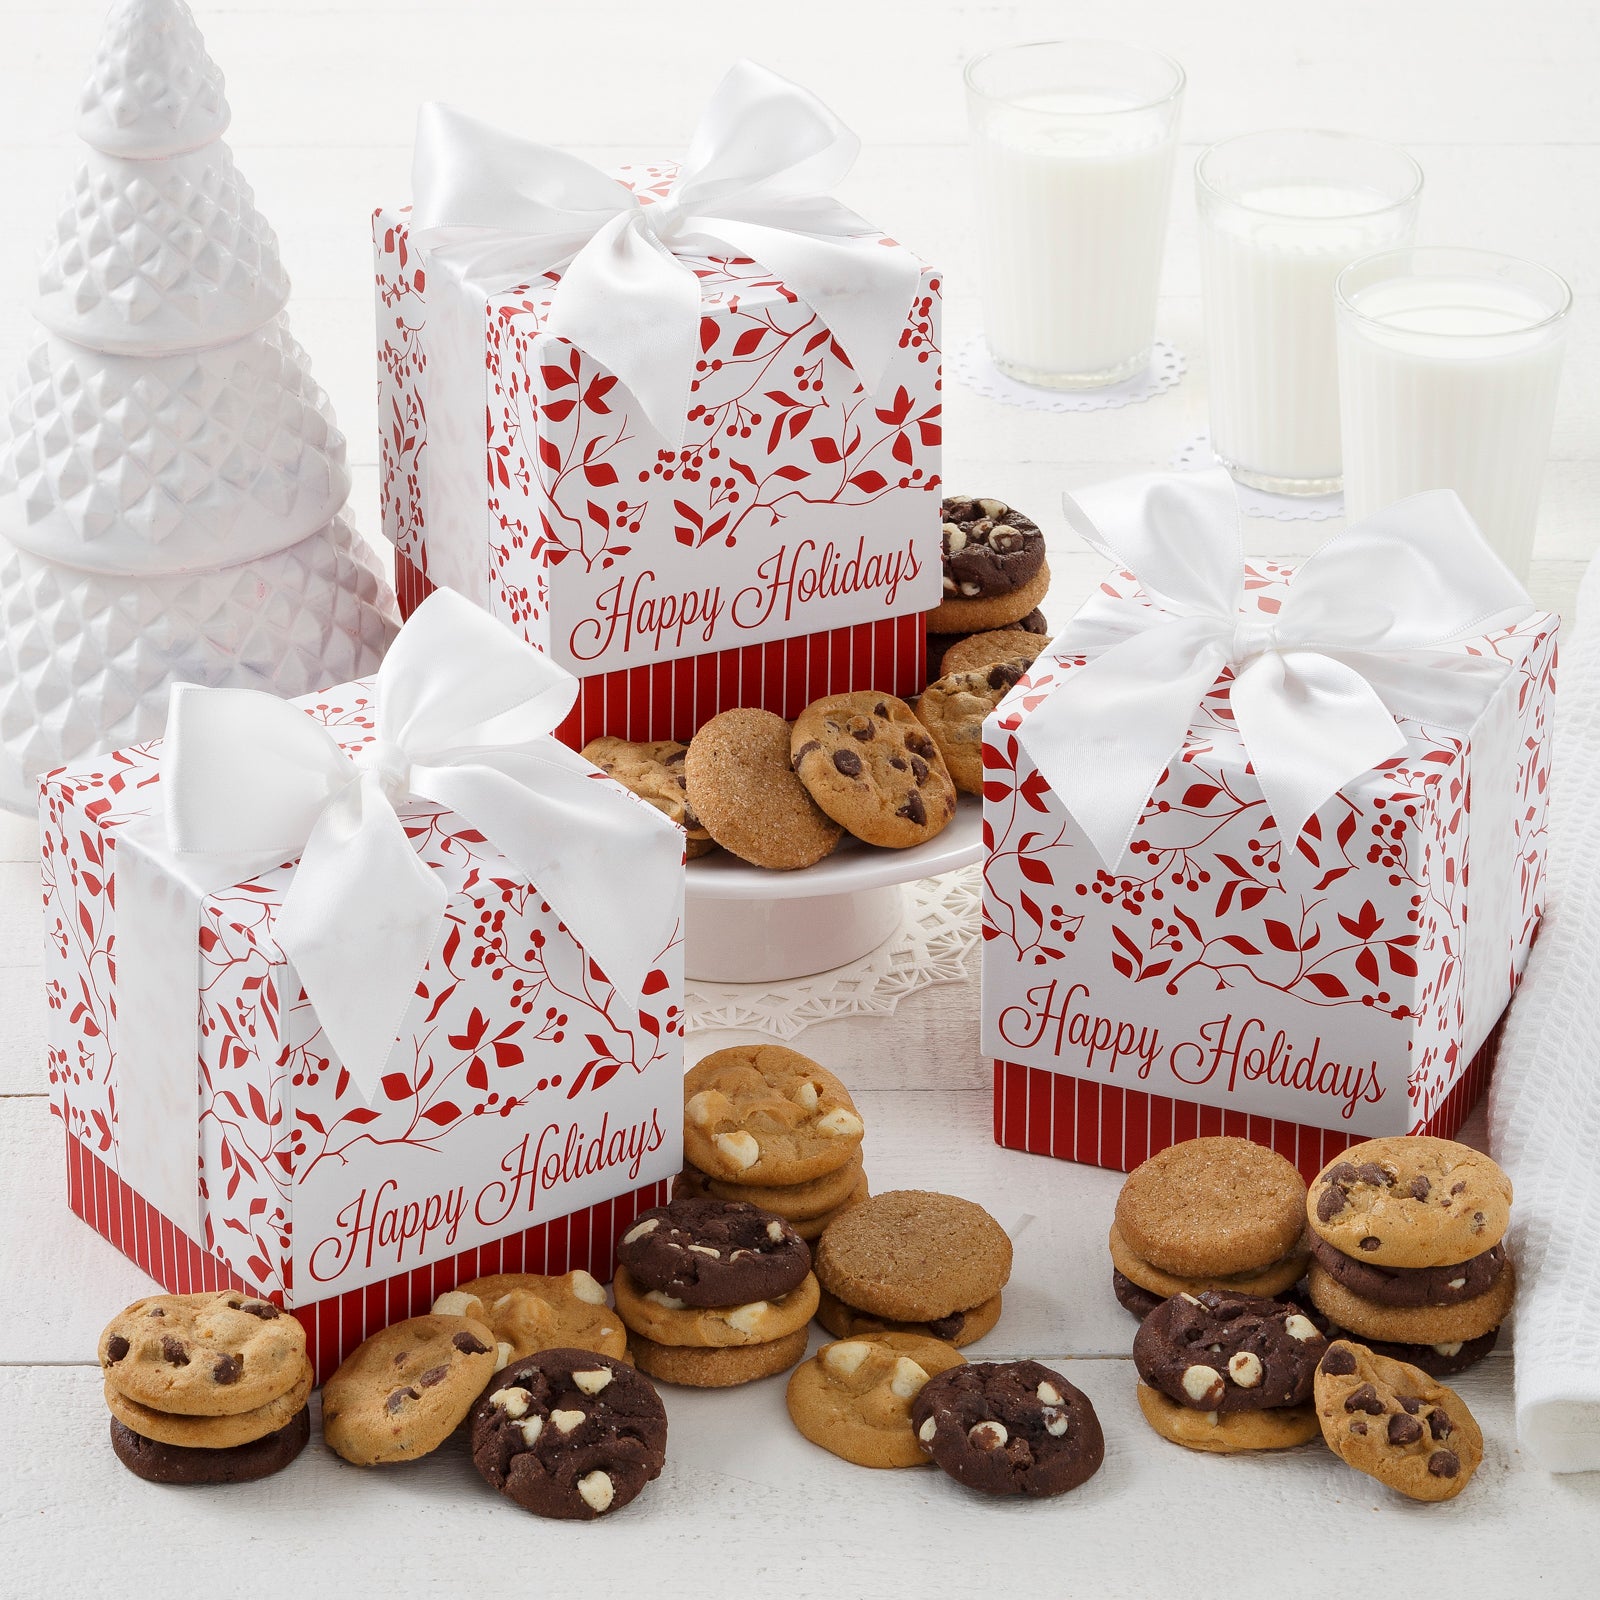 Three Happy Holidays mini gift boxes decorated with holly and surrounded by nut free Nibblers®